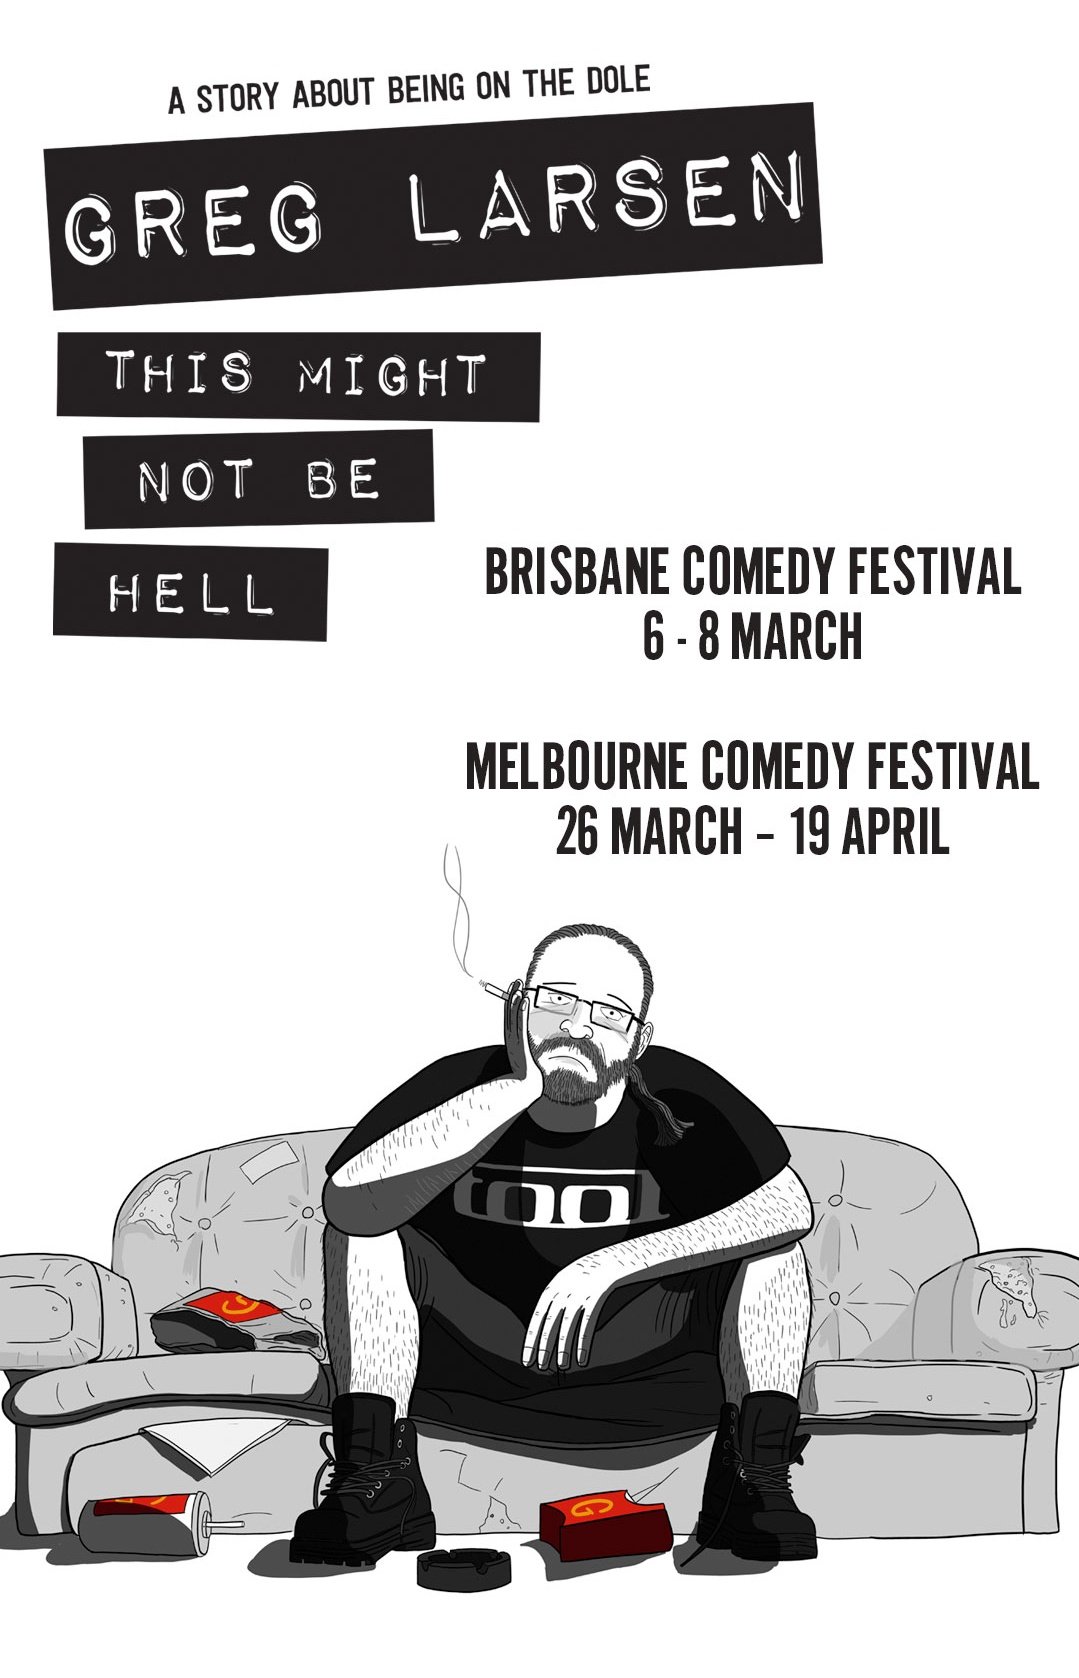 Poster for Greg Larsen comedy show "This Might Not Be Hell" at 2020 Melbourne and Brisbane Comedy Festivals.